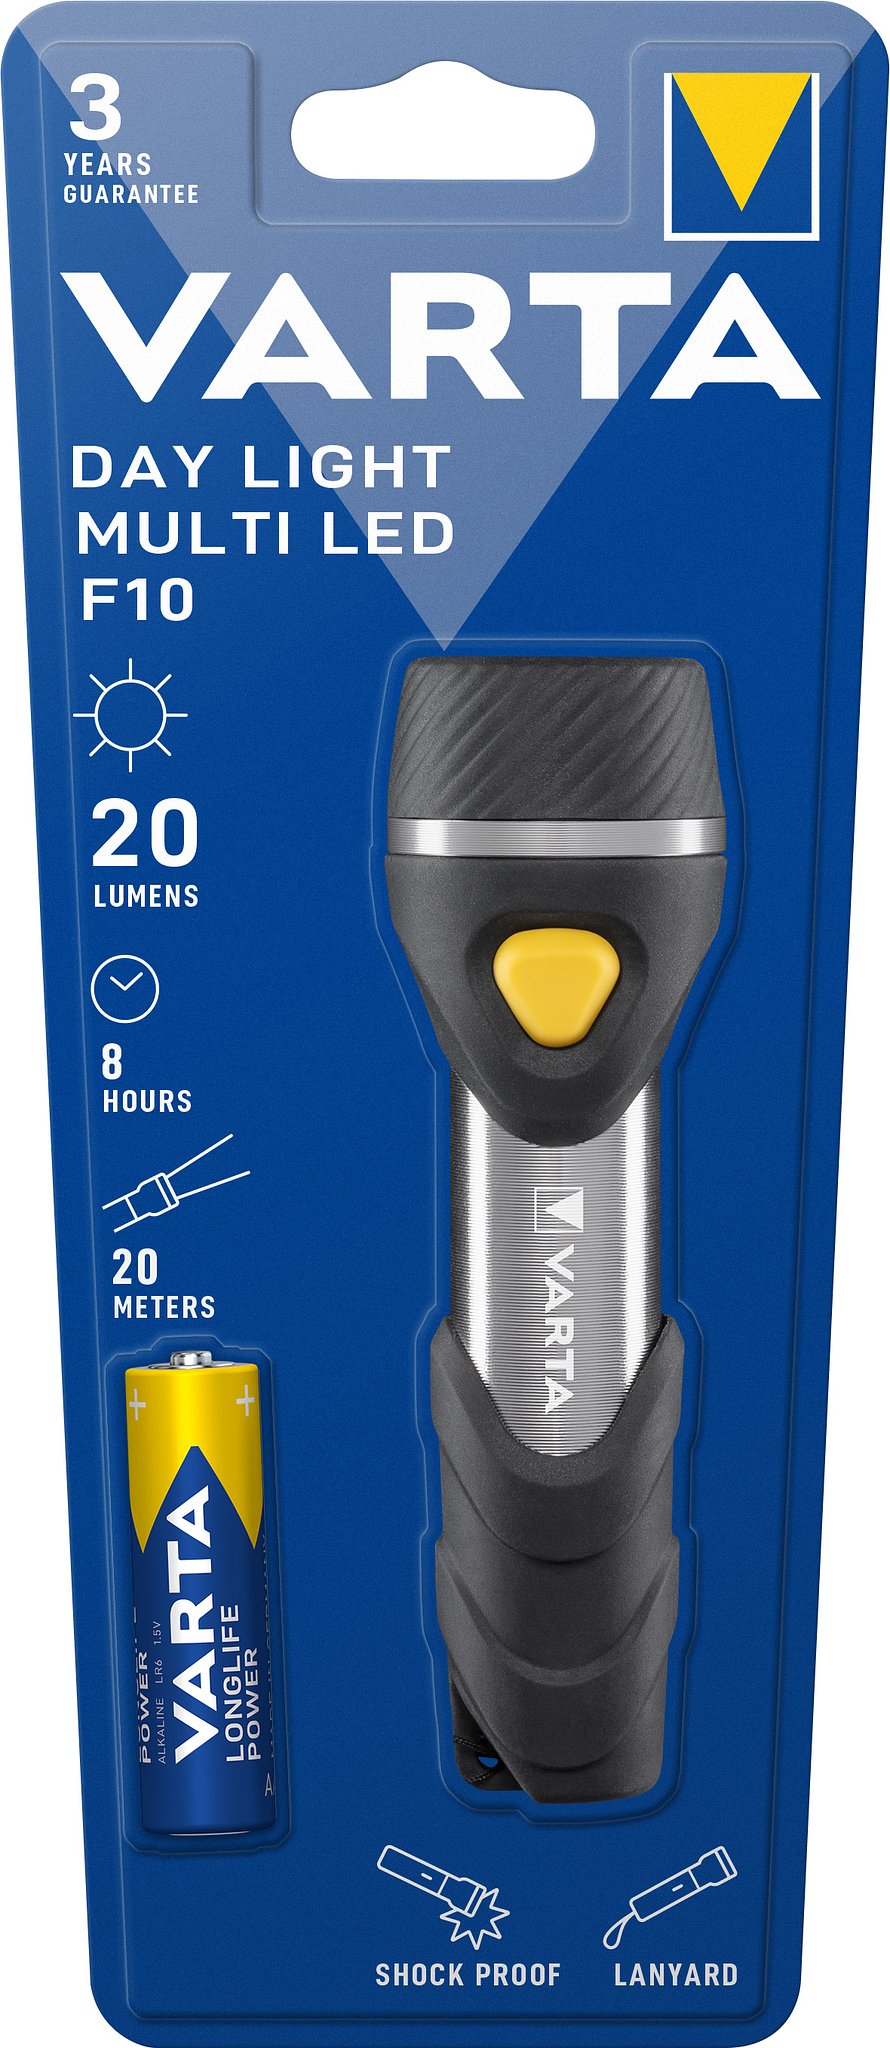 Varta LED torch Day Light, Multi LED F10 20lm, incl. 1x alkaline AAA battery, retail blister